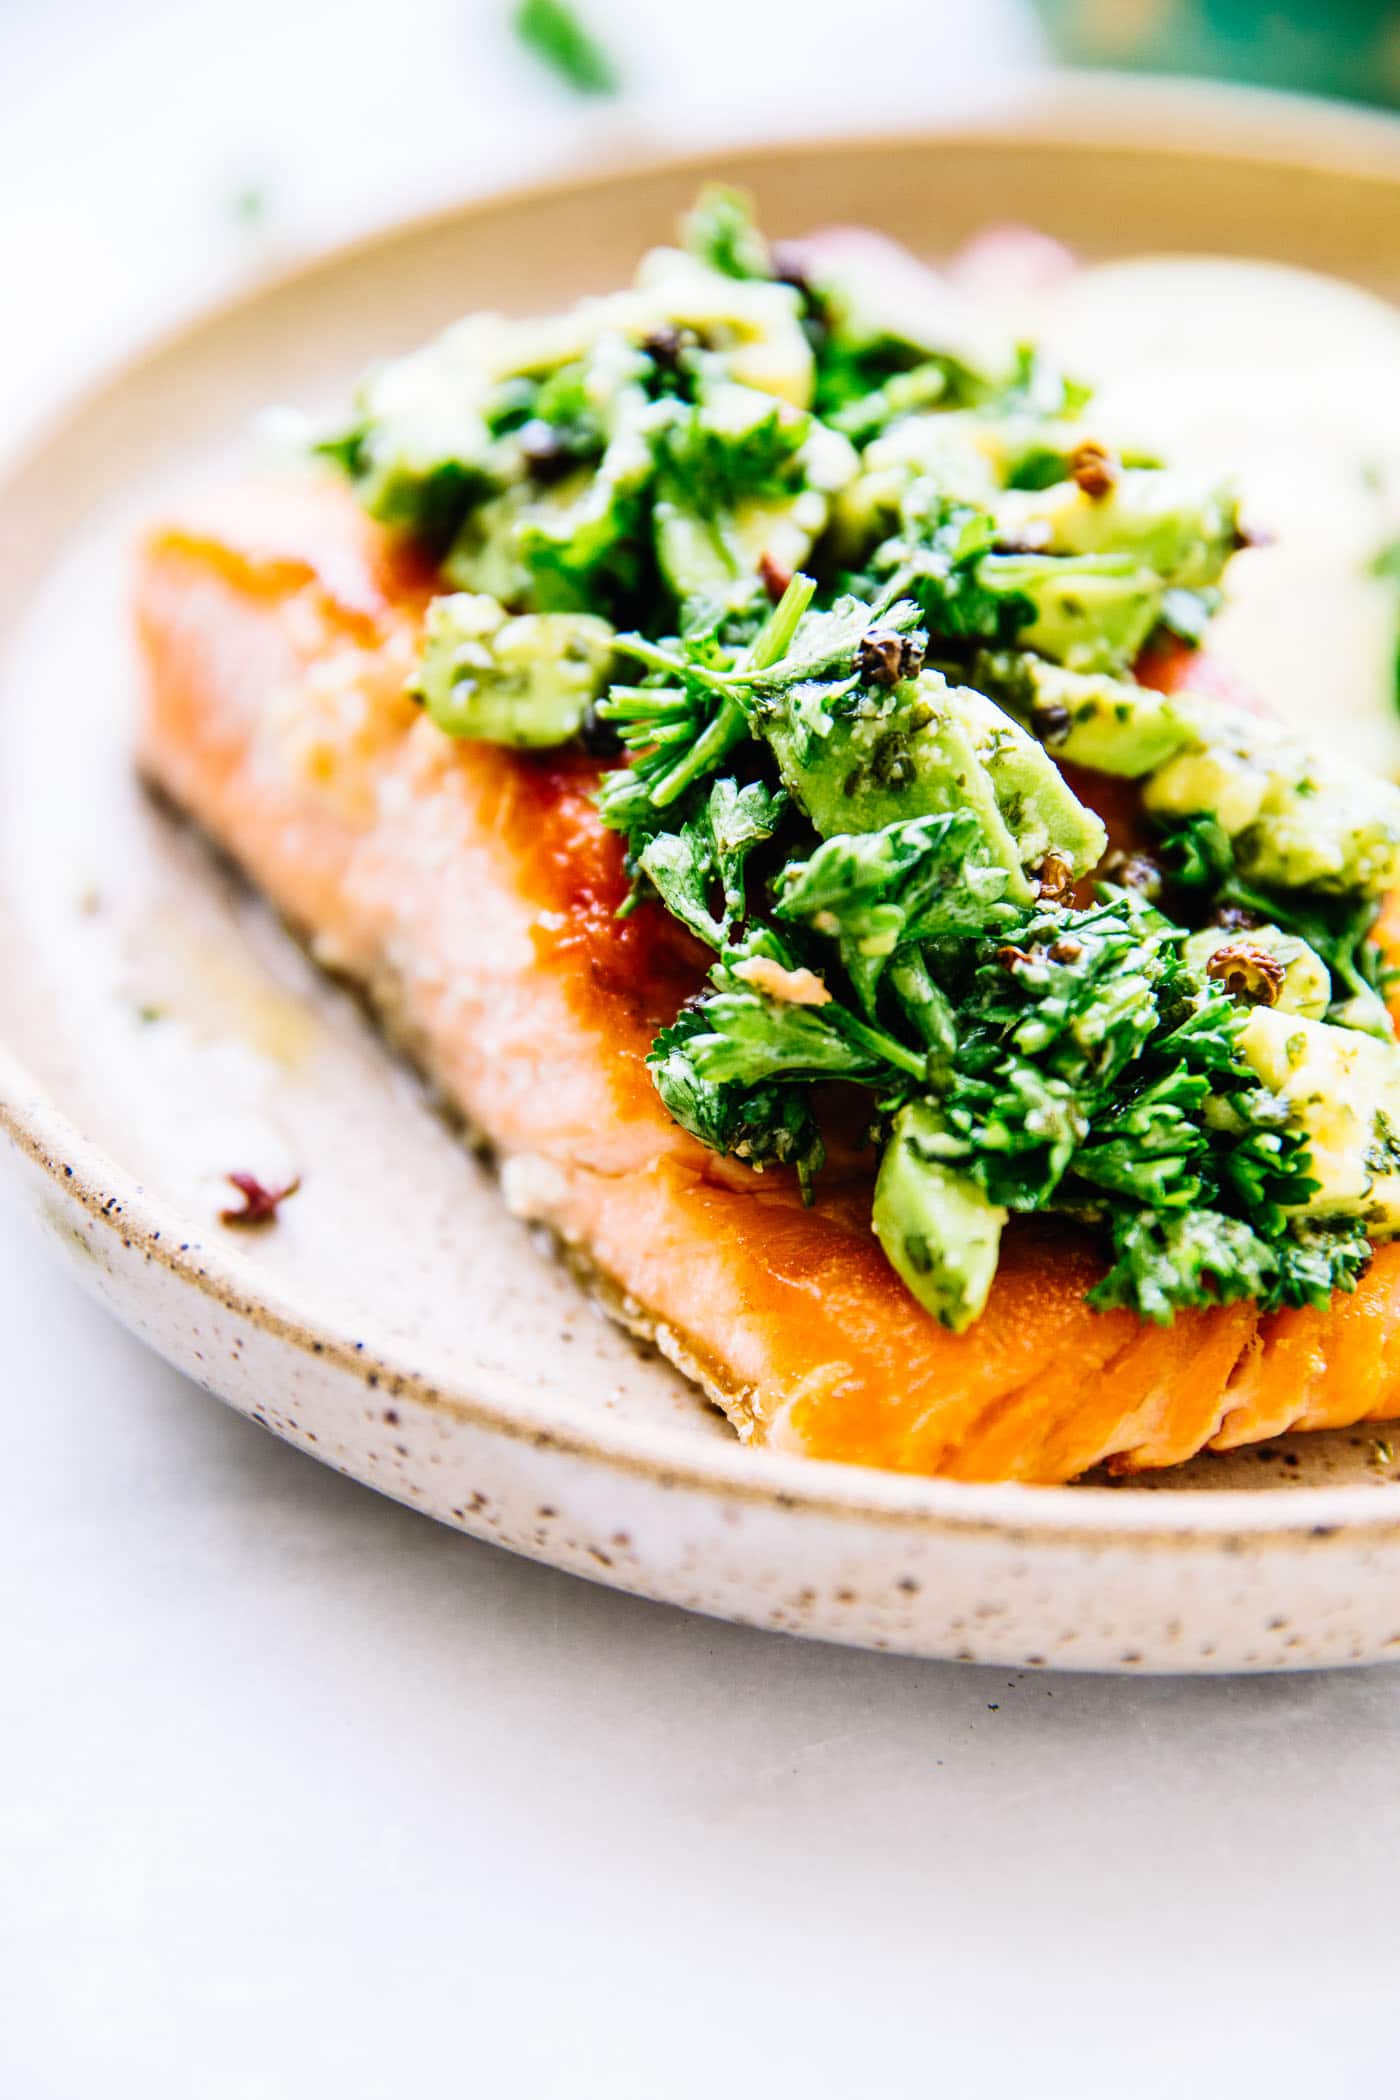 Close up view seared salmon fillet topped with avocado gremolata served in a shallow speckled bowl.